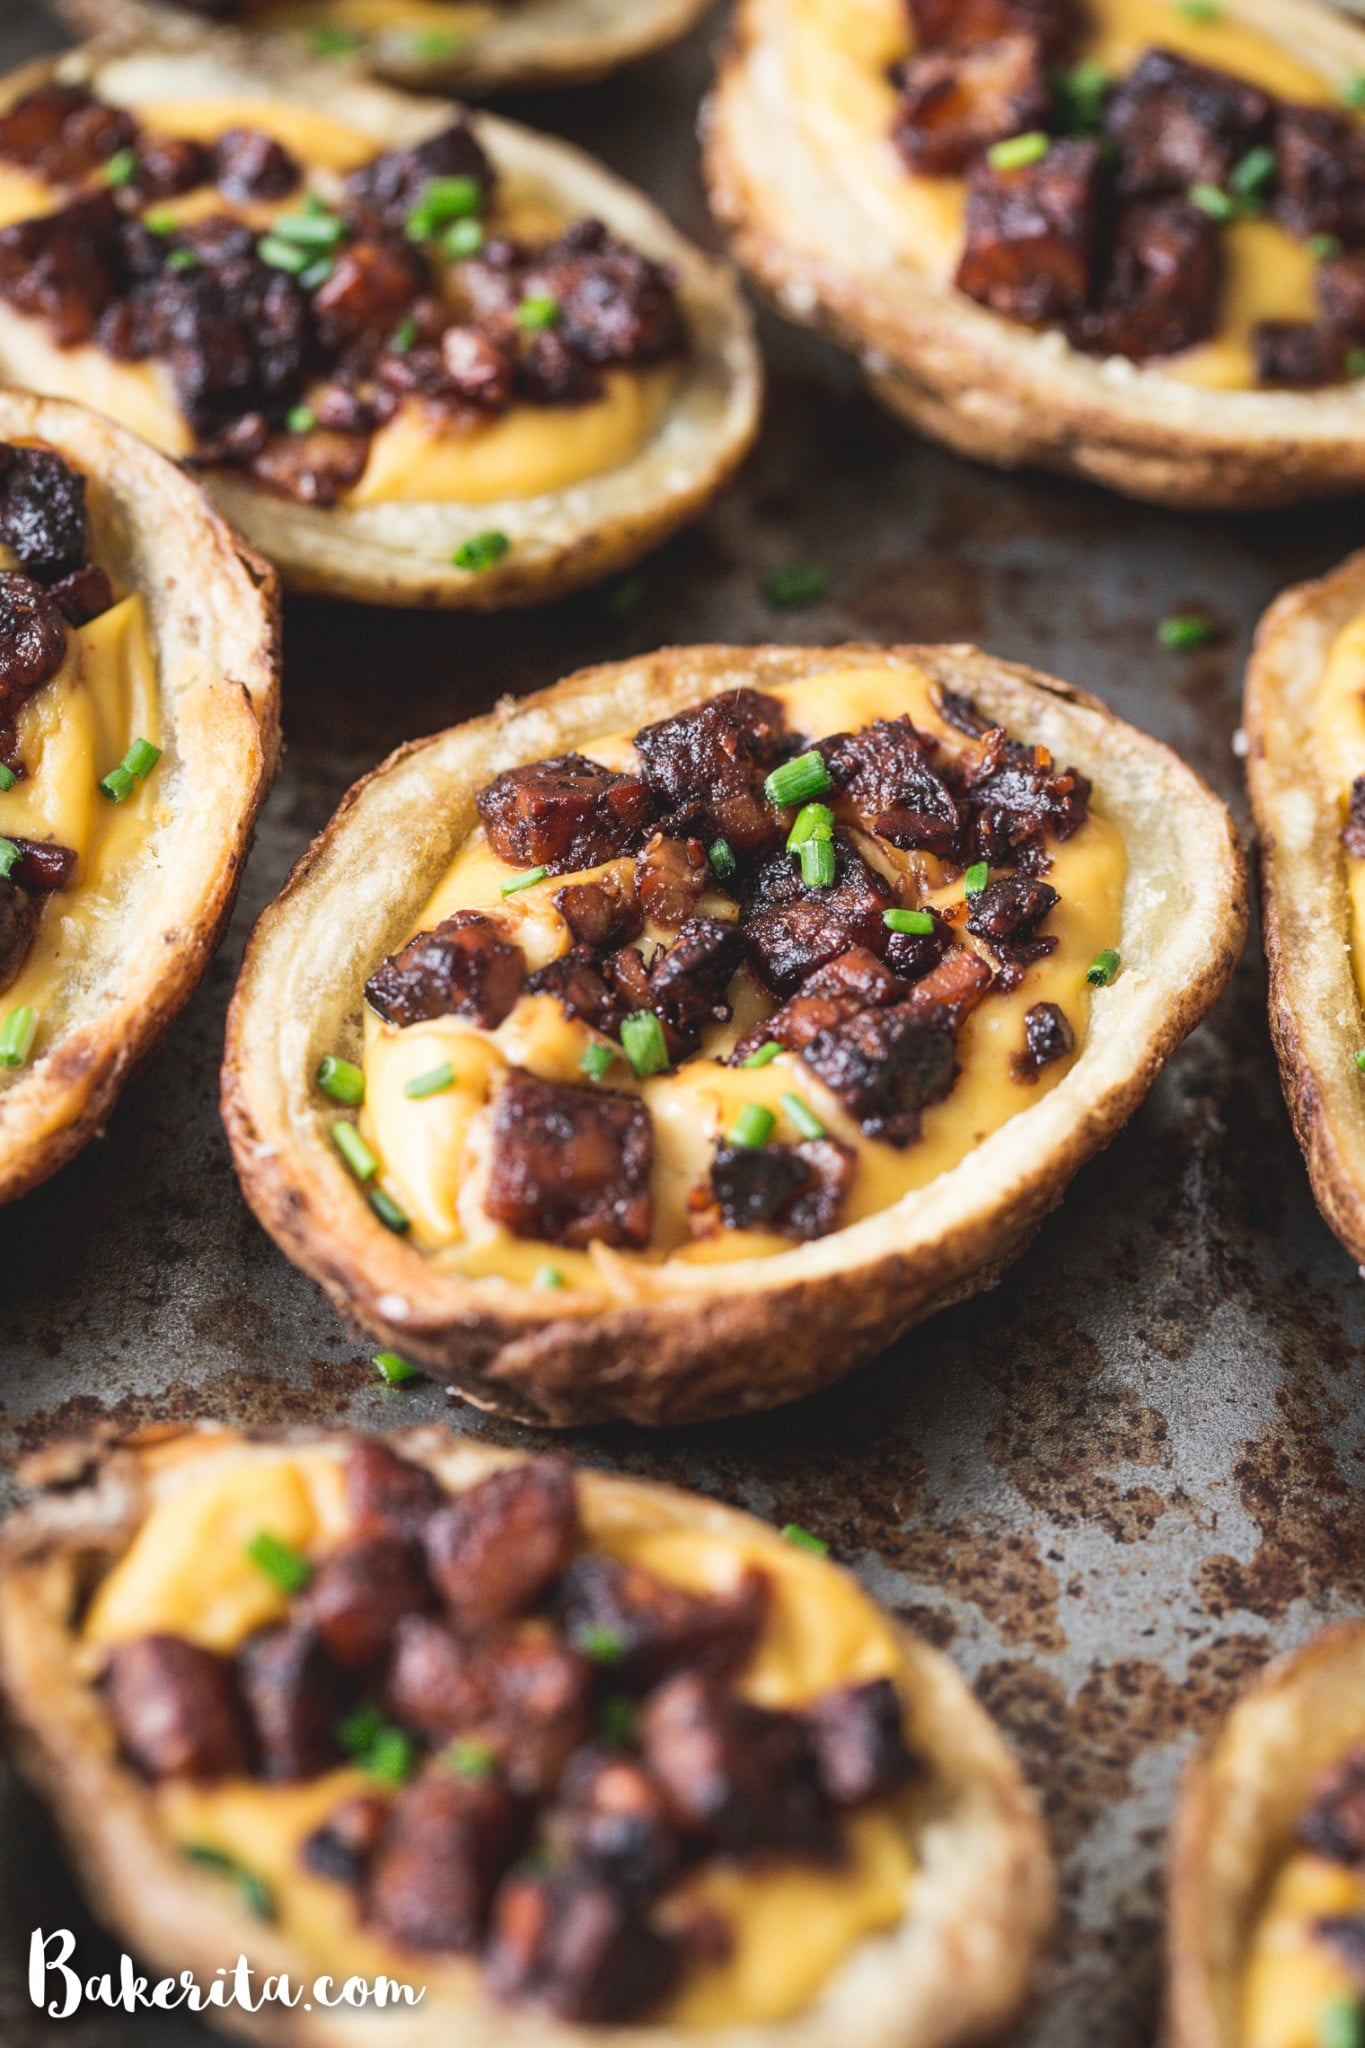 These Vegan Potato Skins are my new favorite vegan appetizer! Baked instead of fried, these are a healthier take on the classic. They're made with vegan cheese sauce and the best tempeh bacon bits.